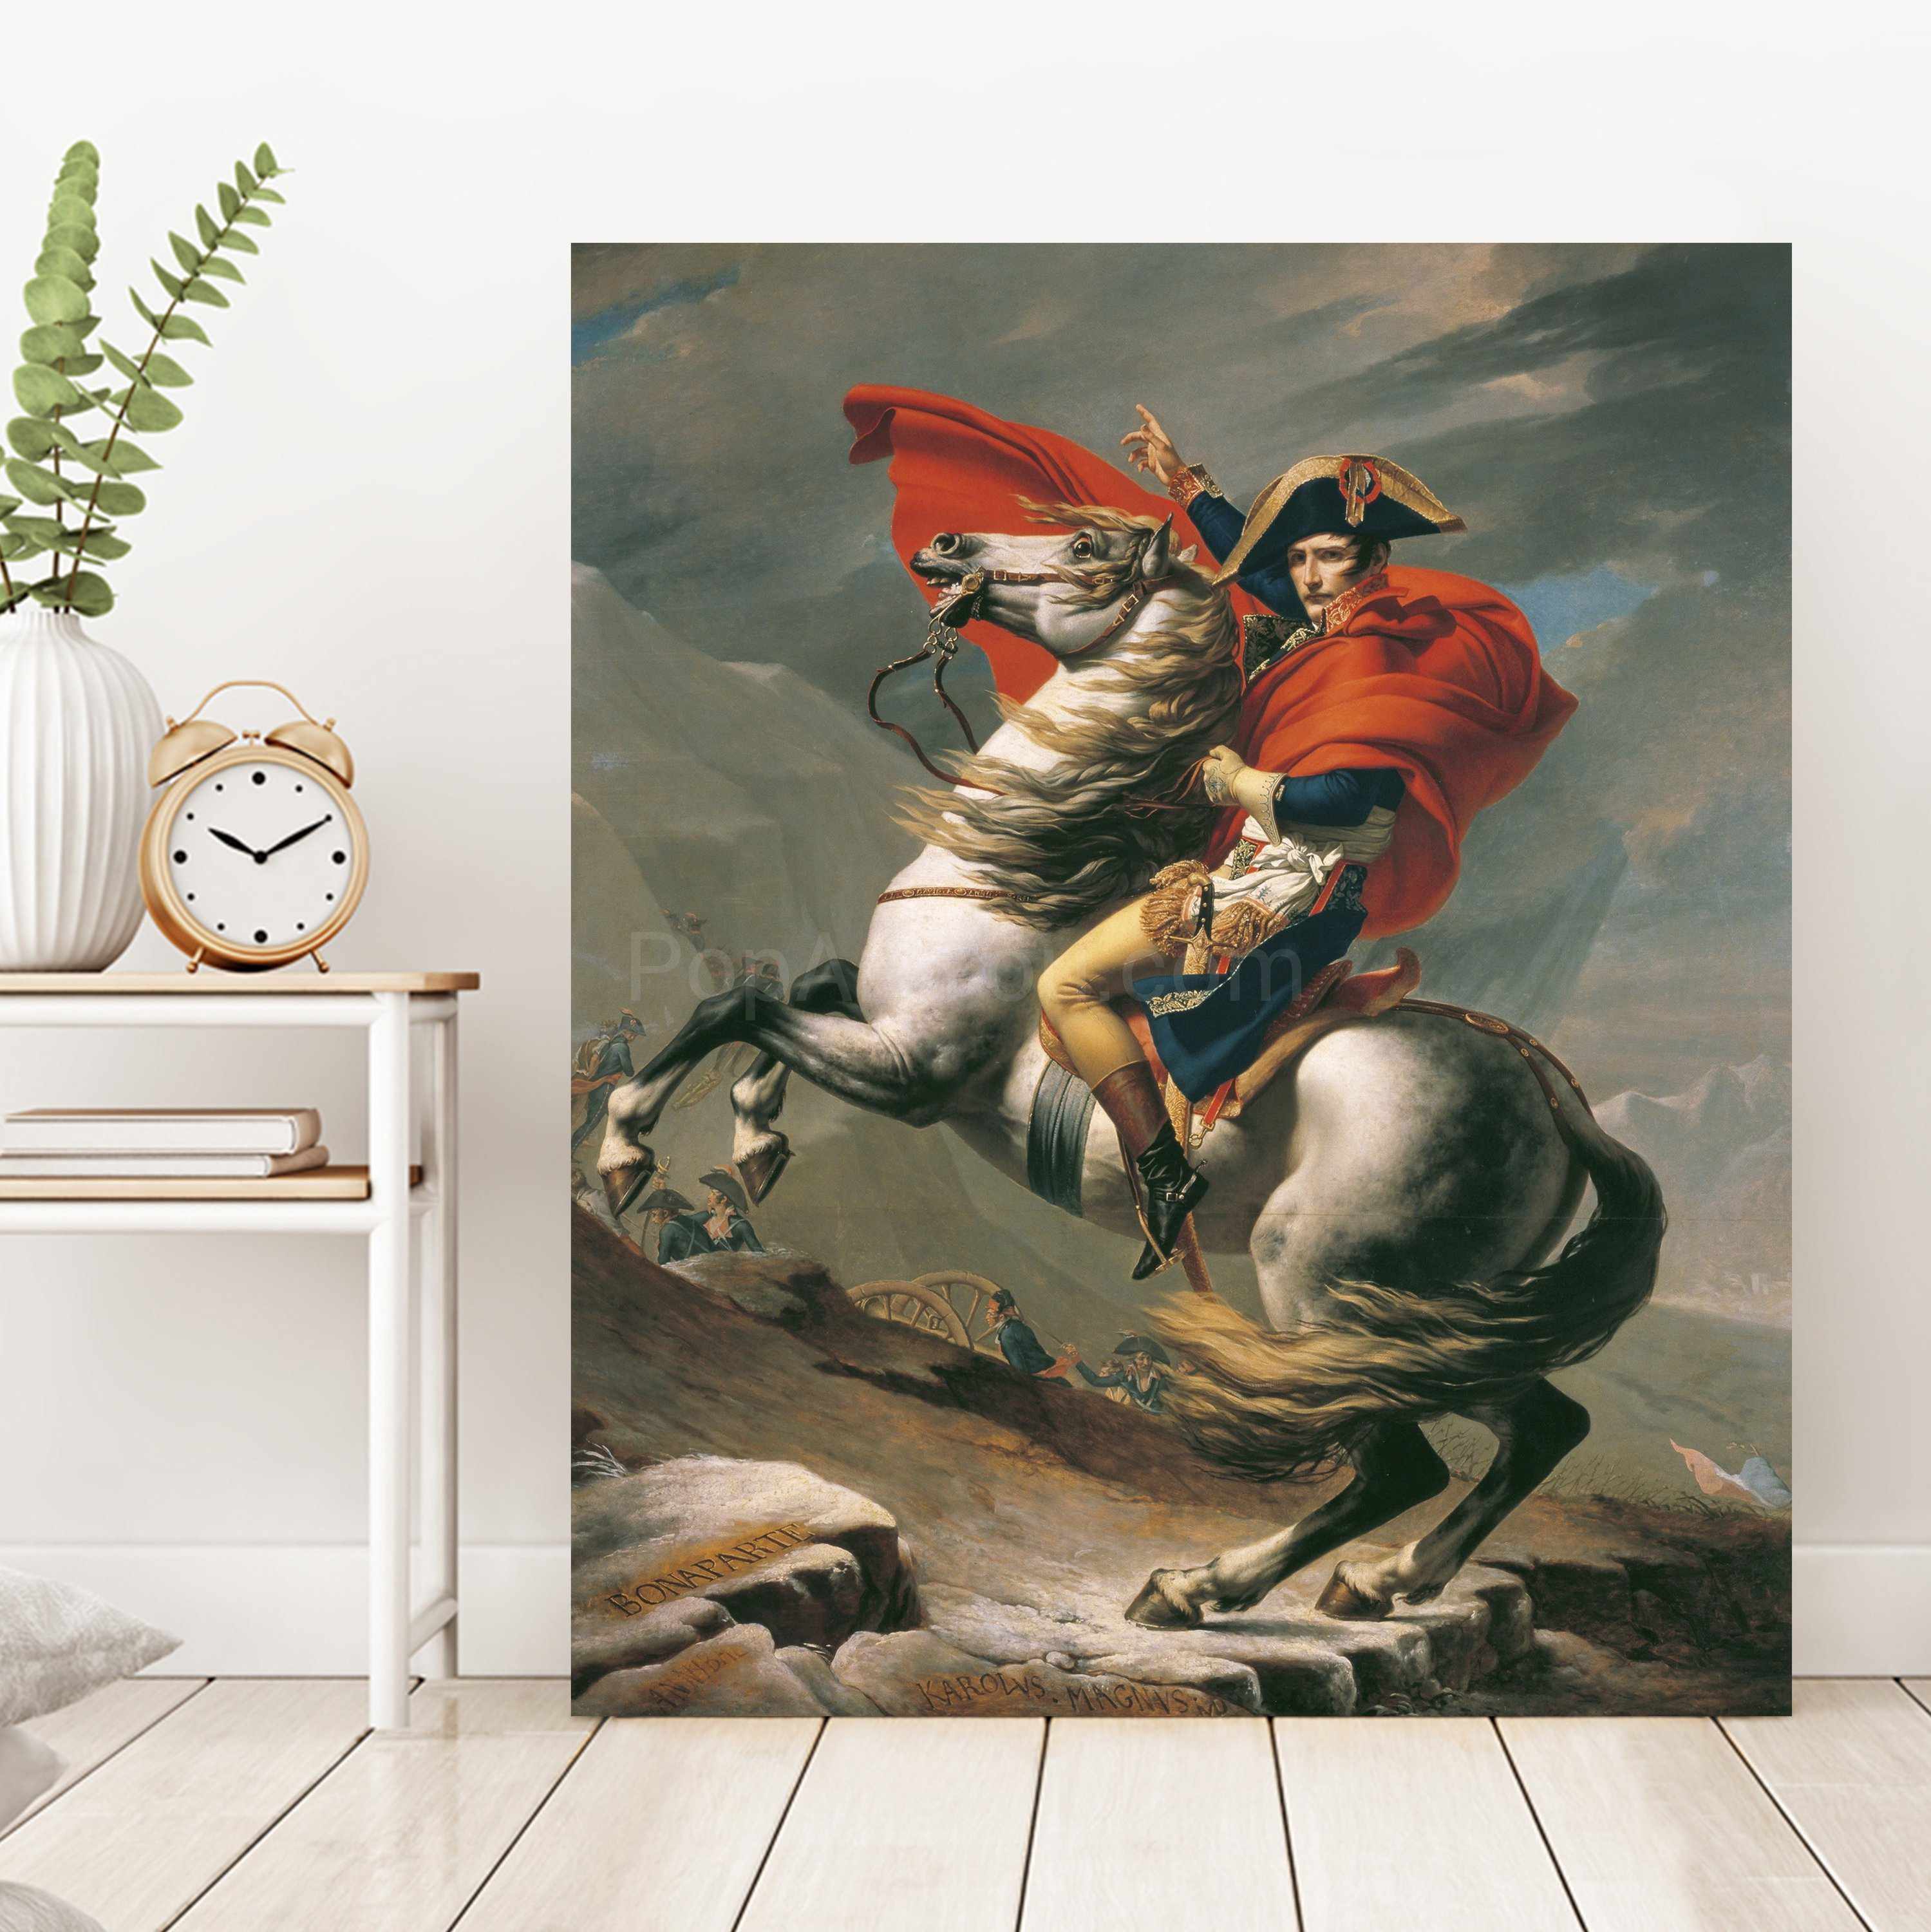 A portrait of a man dressed in renaissance regal attire riding a white horse stands on the wooden floor